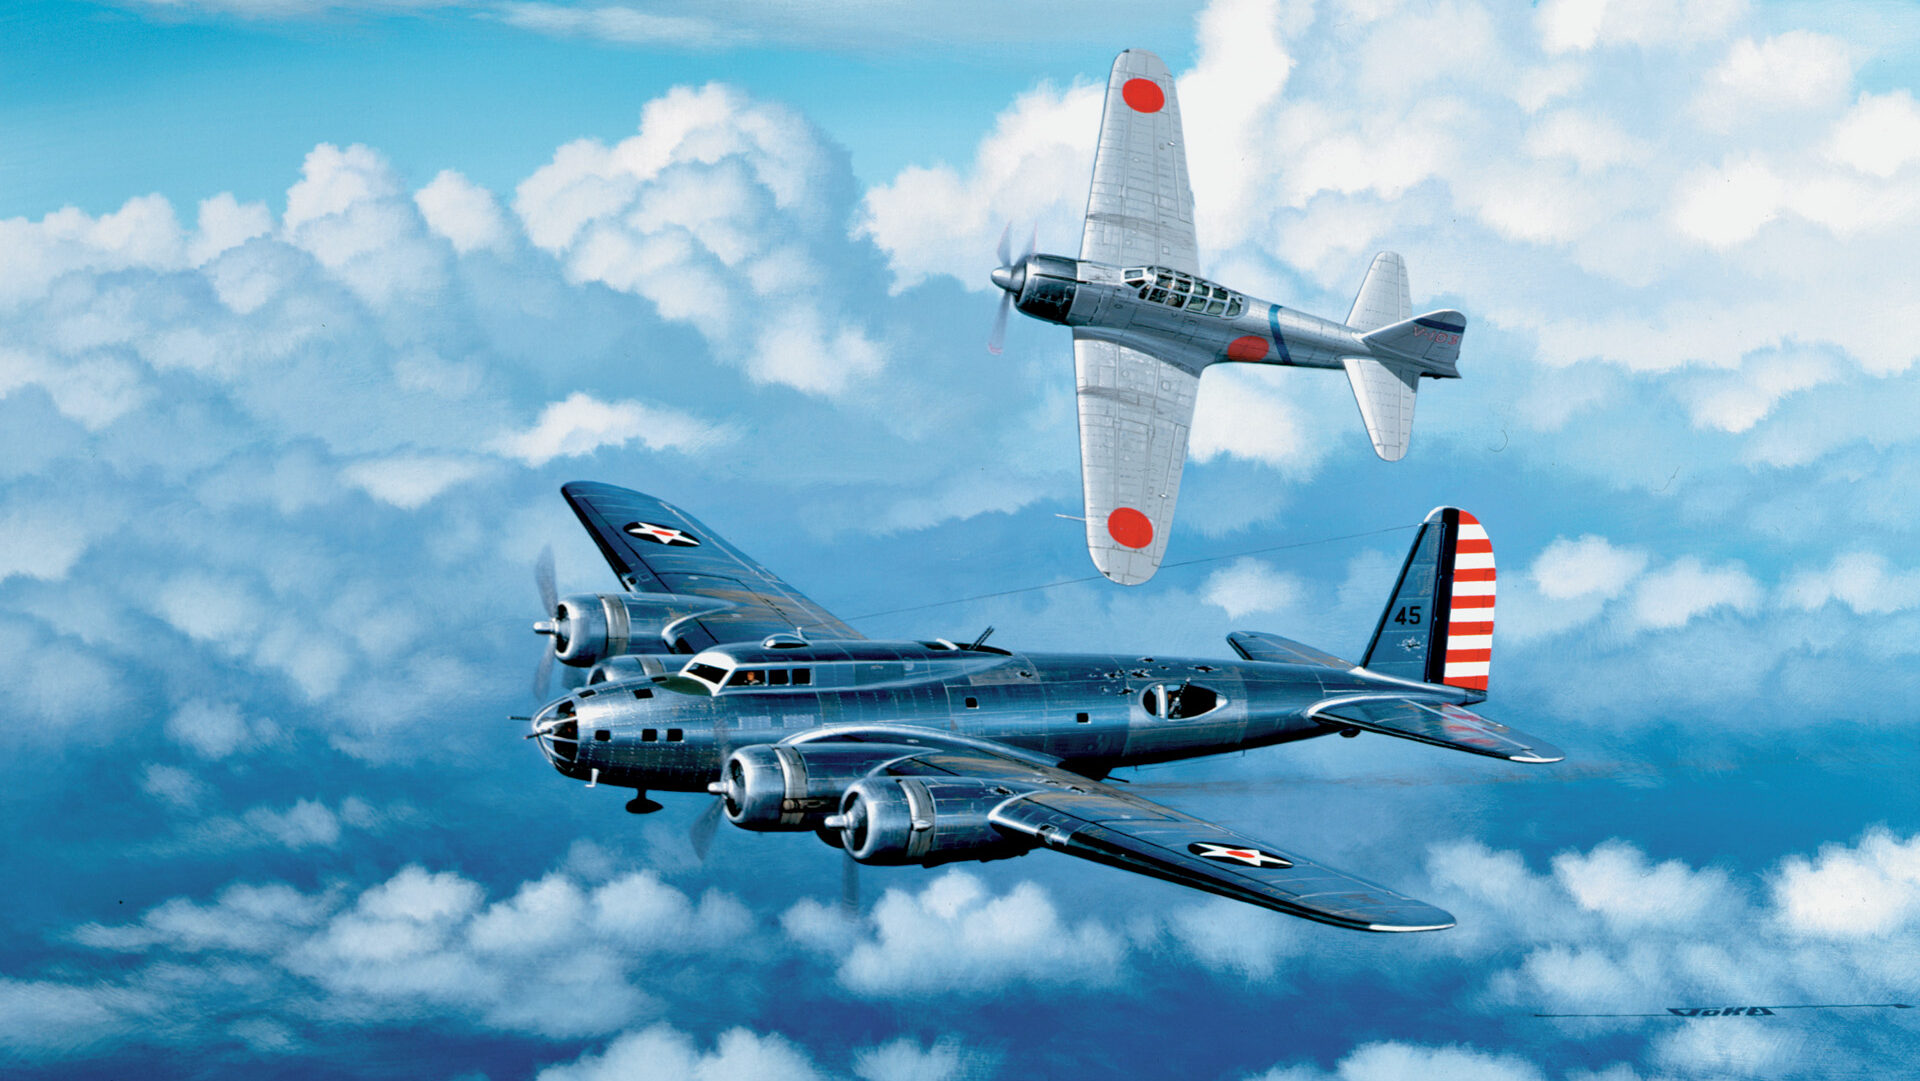 The B-17 bomber flown by Captain Colin P. Kelly, Jr., is shadowed by a Zero piloted by famed Japanese ace Saburo Sakai, who shot Kelly down on December 10, 1941.